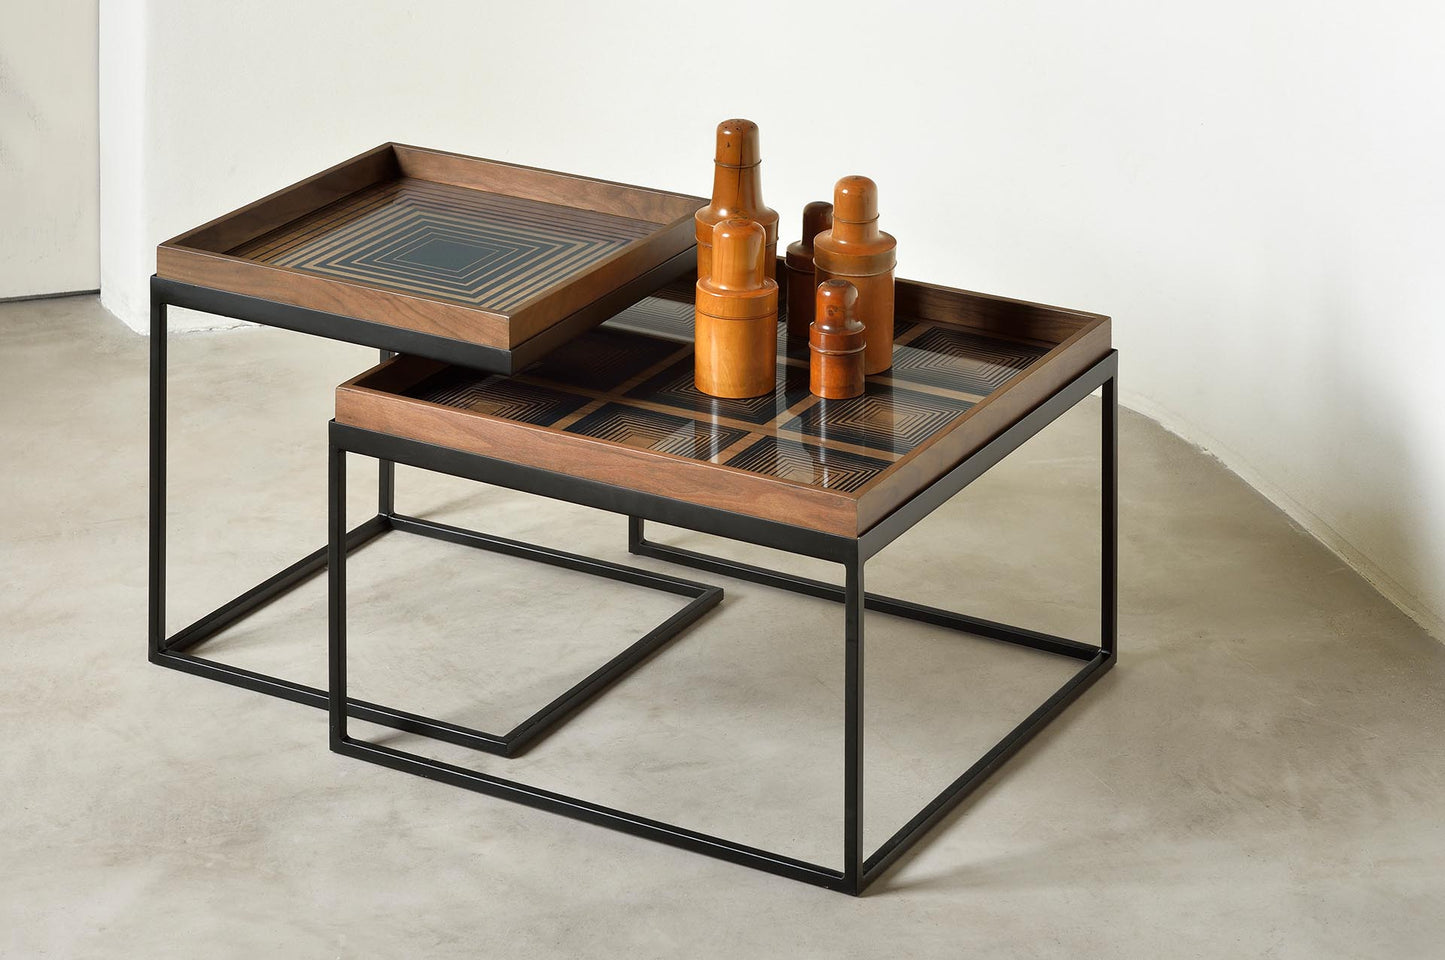 Square tray coffee table set (trays not included)